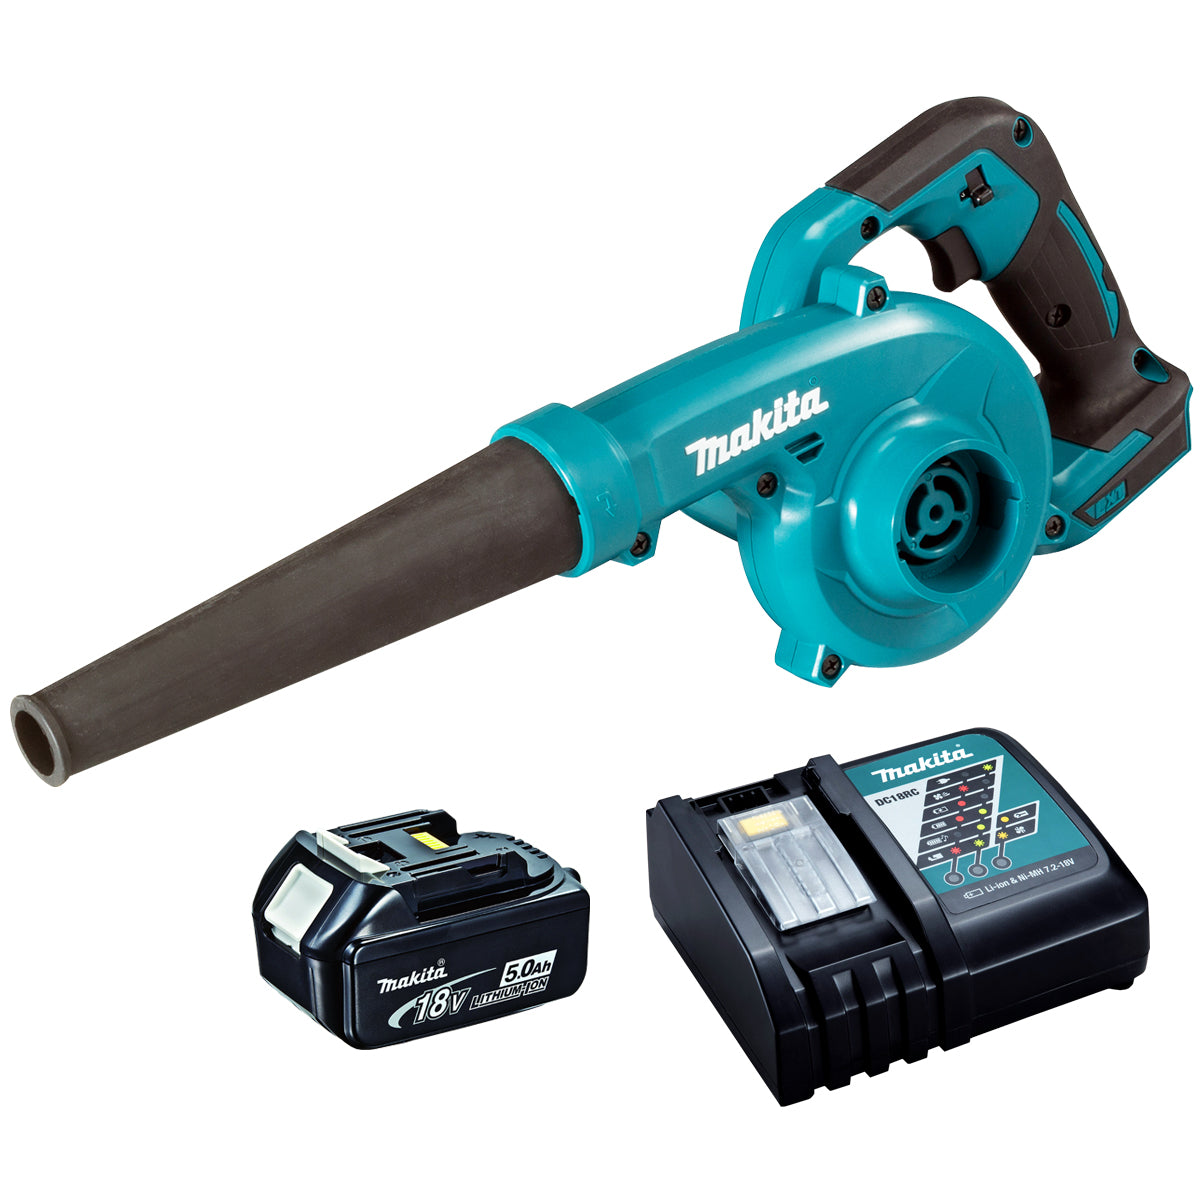 Makita DUB185Z 18V LXT Blower with Vacuum Function 5.0Ah Battery & Charger